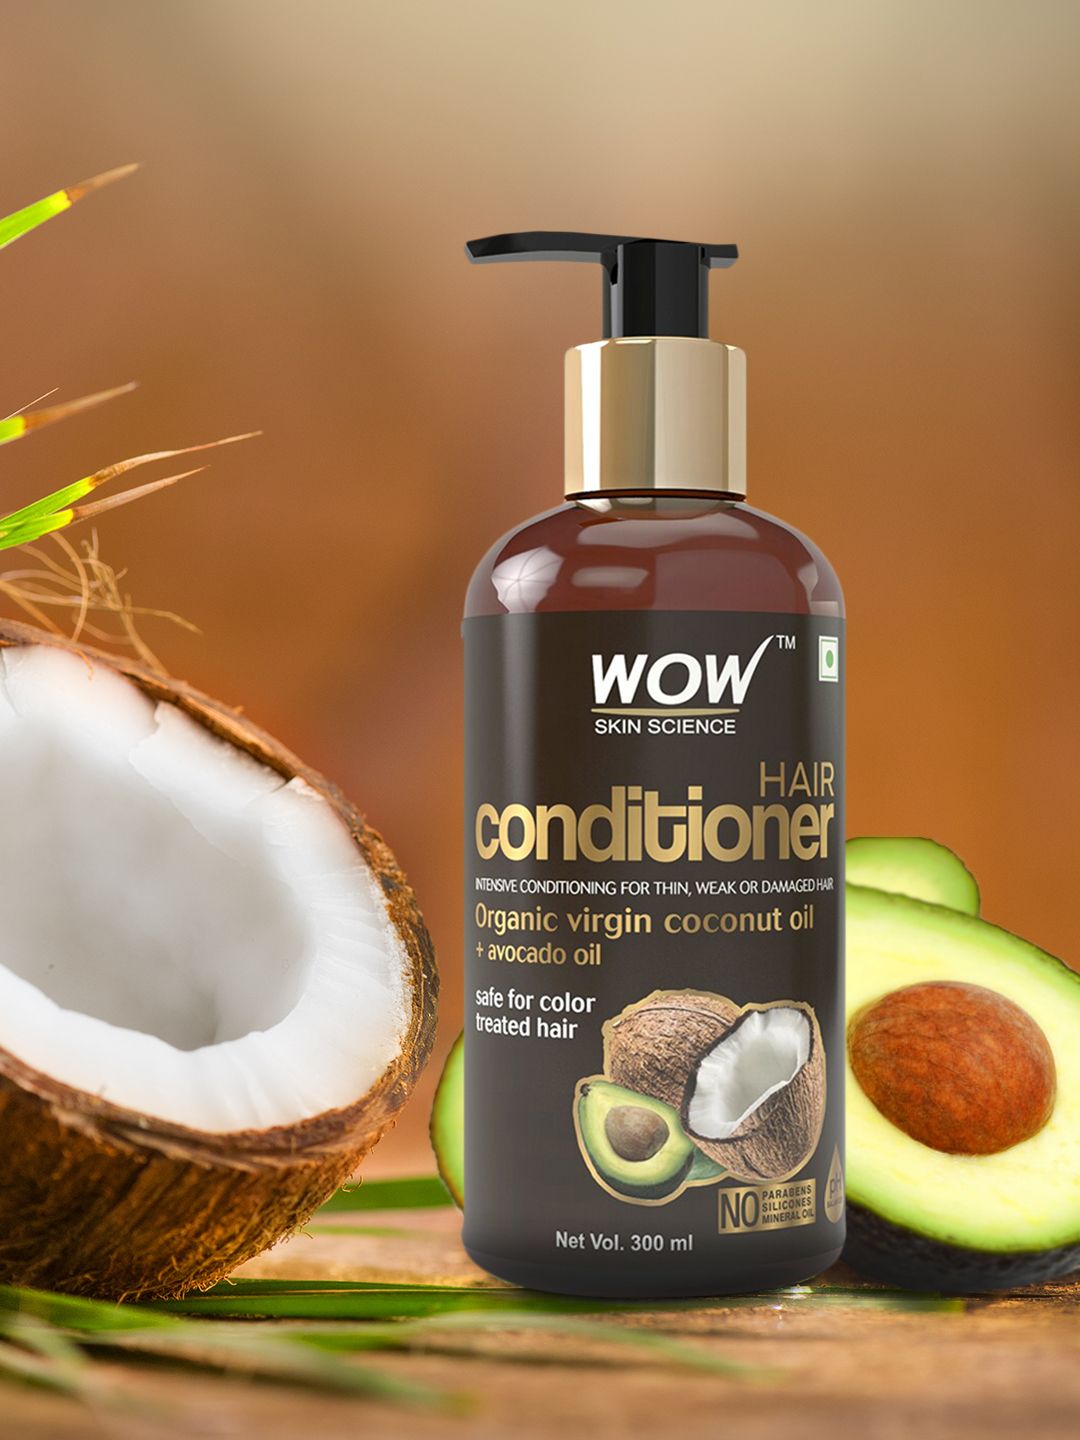 WOW SKIN SCIENCE Coconut Milk Conditioner For Dry/Frizzy Hair with Dht Blockers - 300 ml Price in India